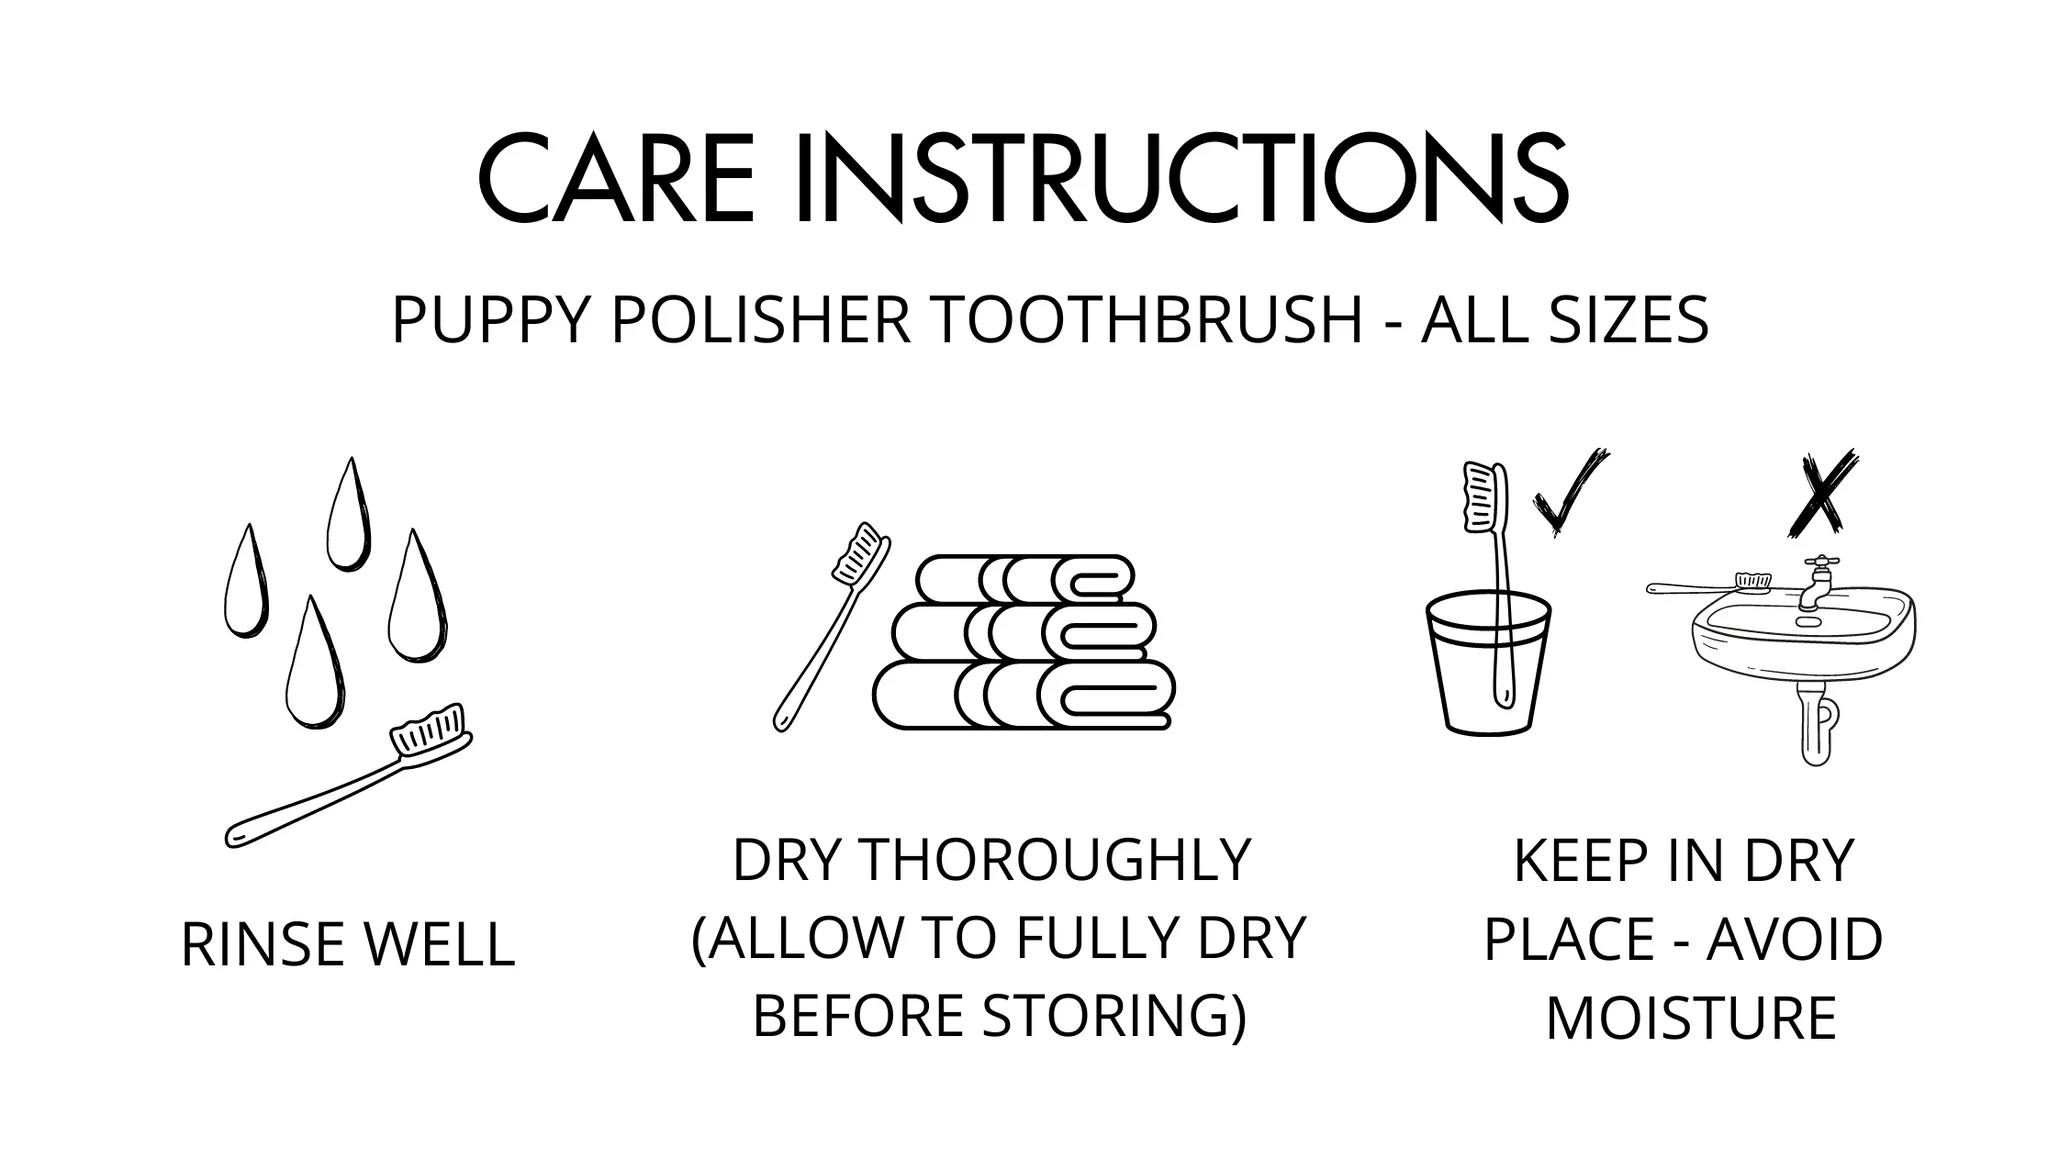 Puppy Polisher Biodegradable Toothbrush - Image 1